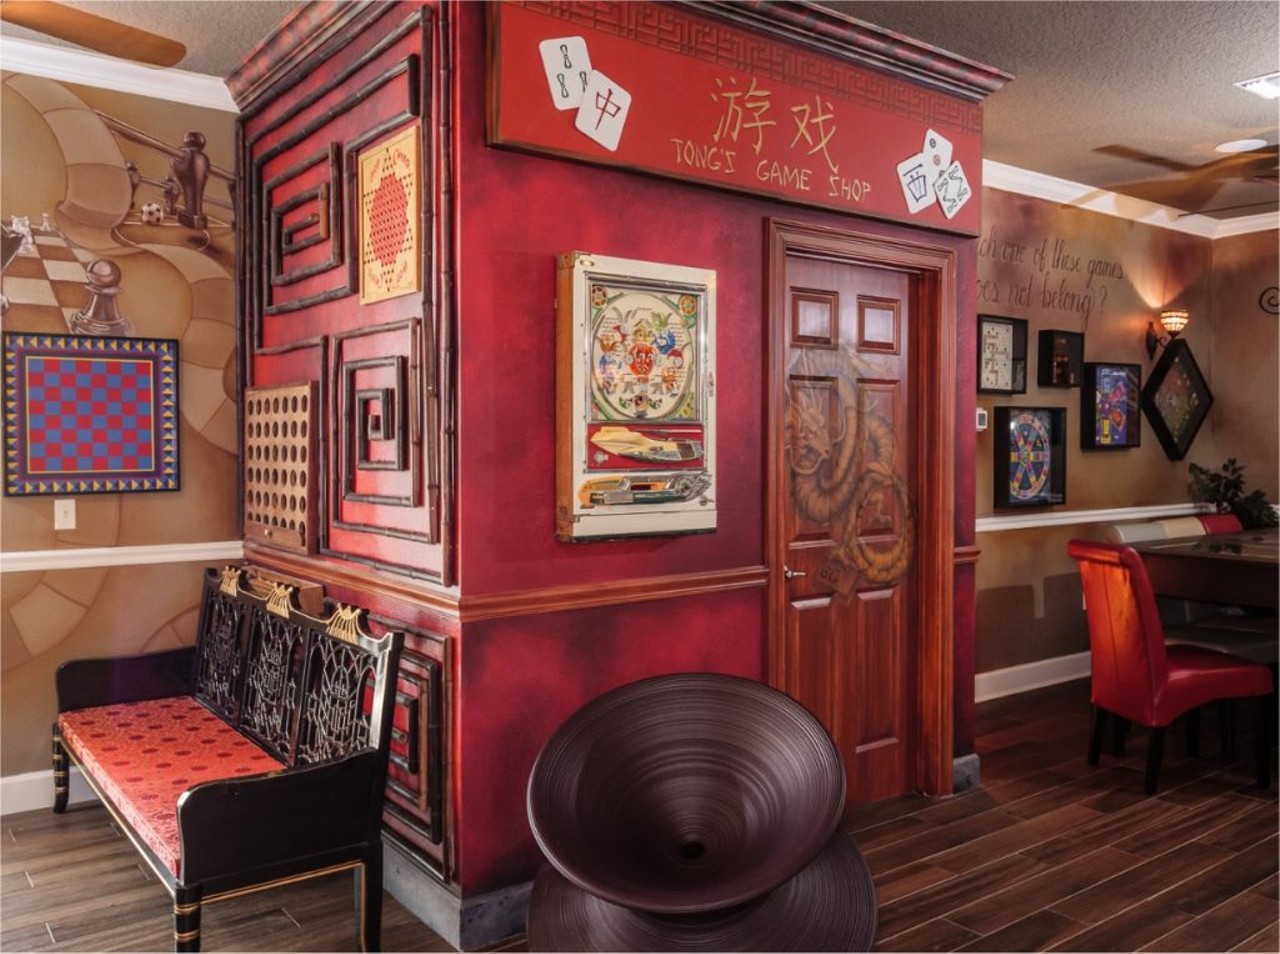 Spend your next vacation at this insane game-themed mansion in Central Florida